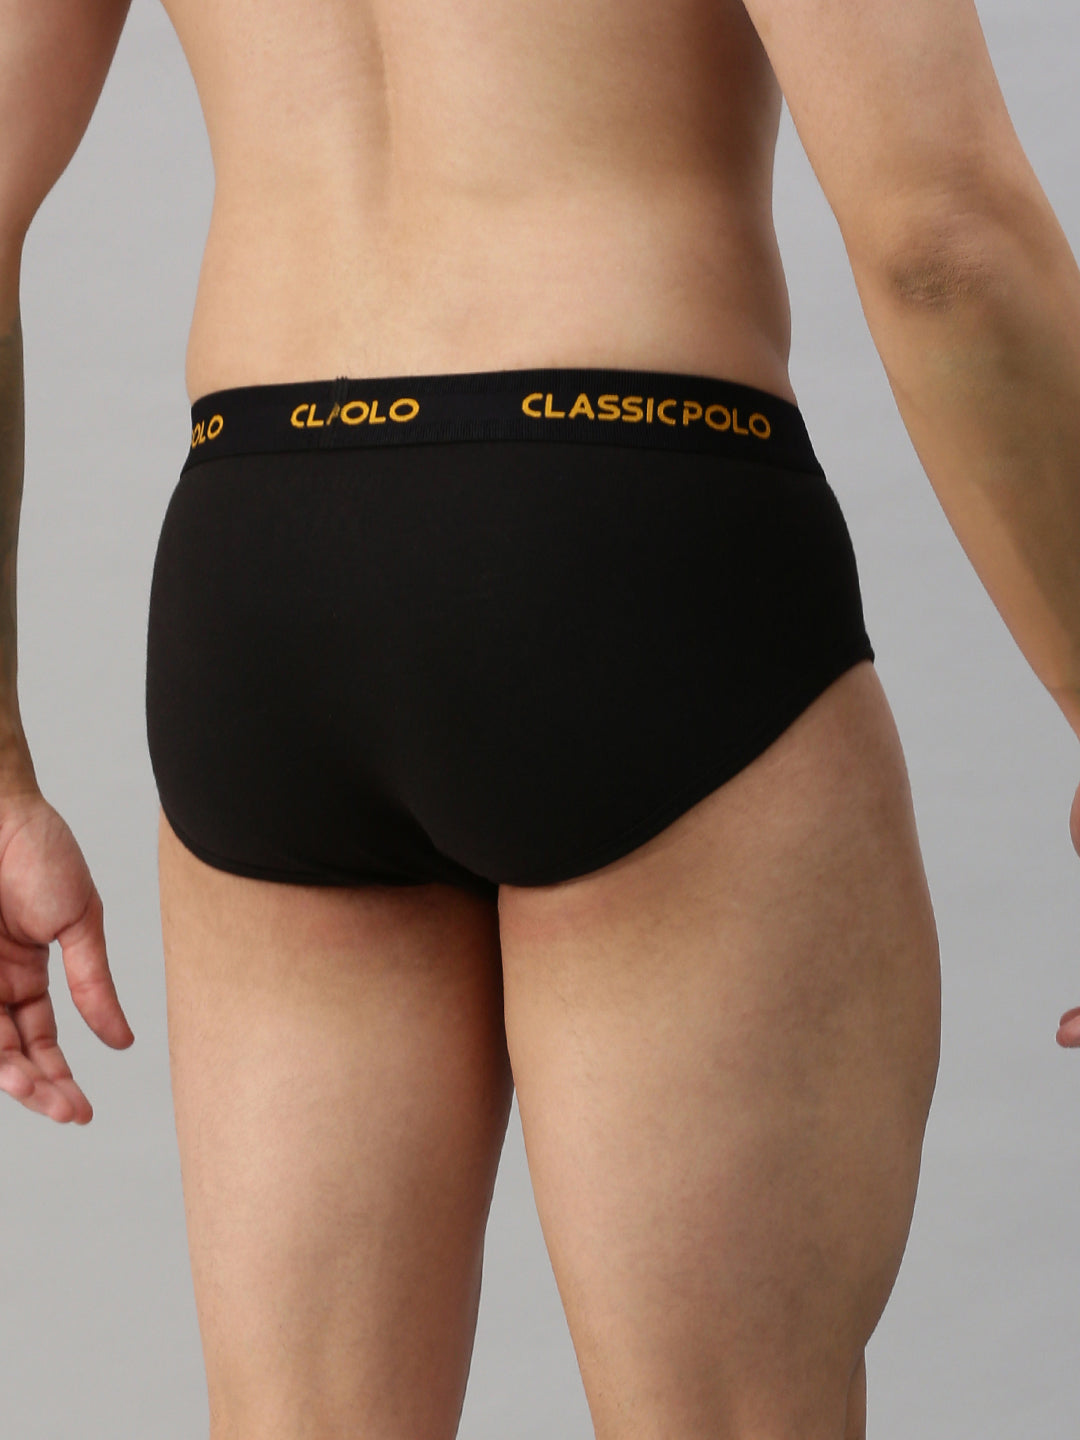 Classic Polo Men's Modal Solid Briefs | Scarce - Black (Pack of 2)